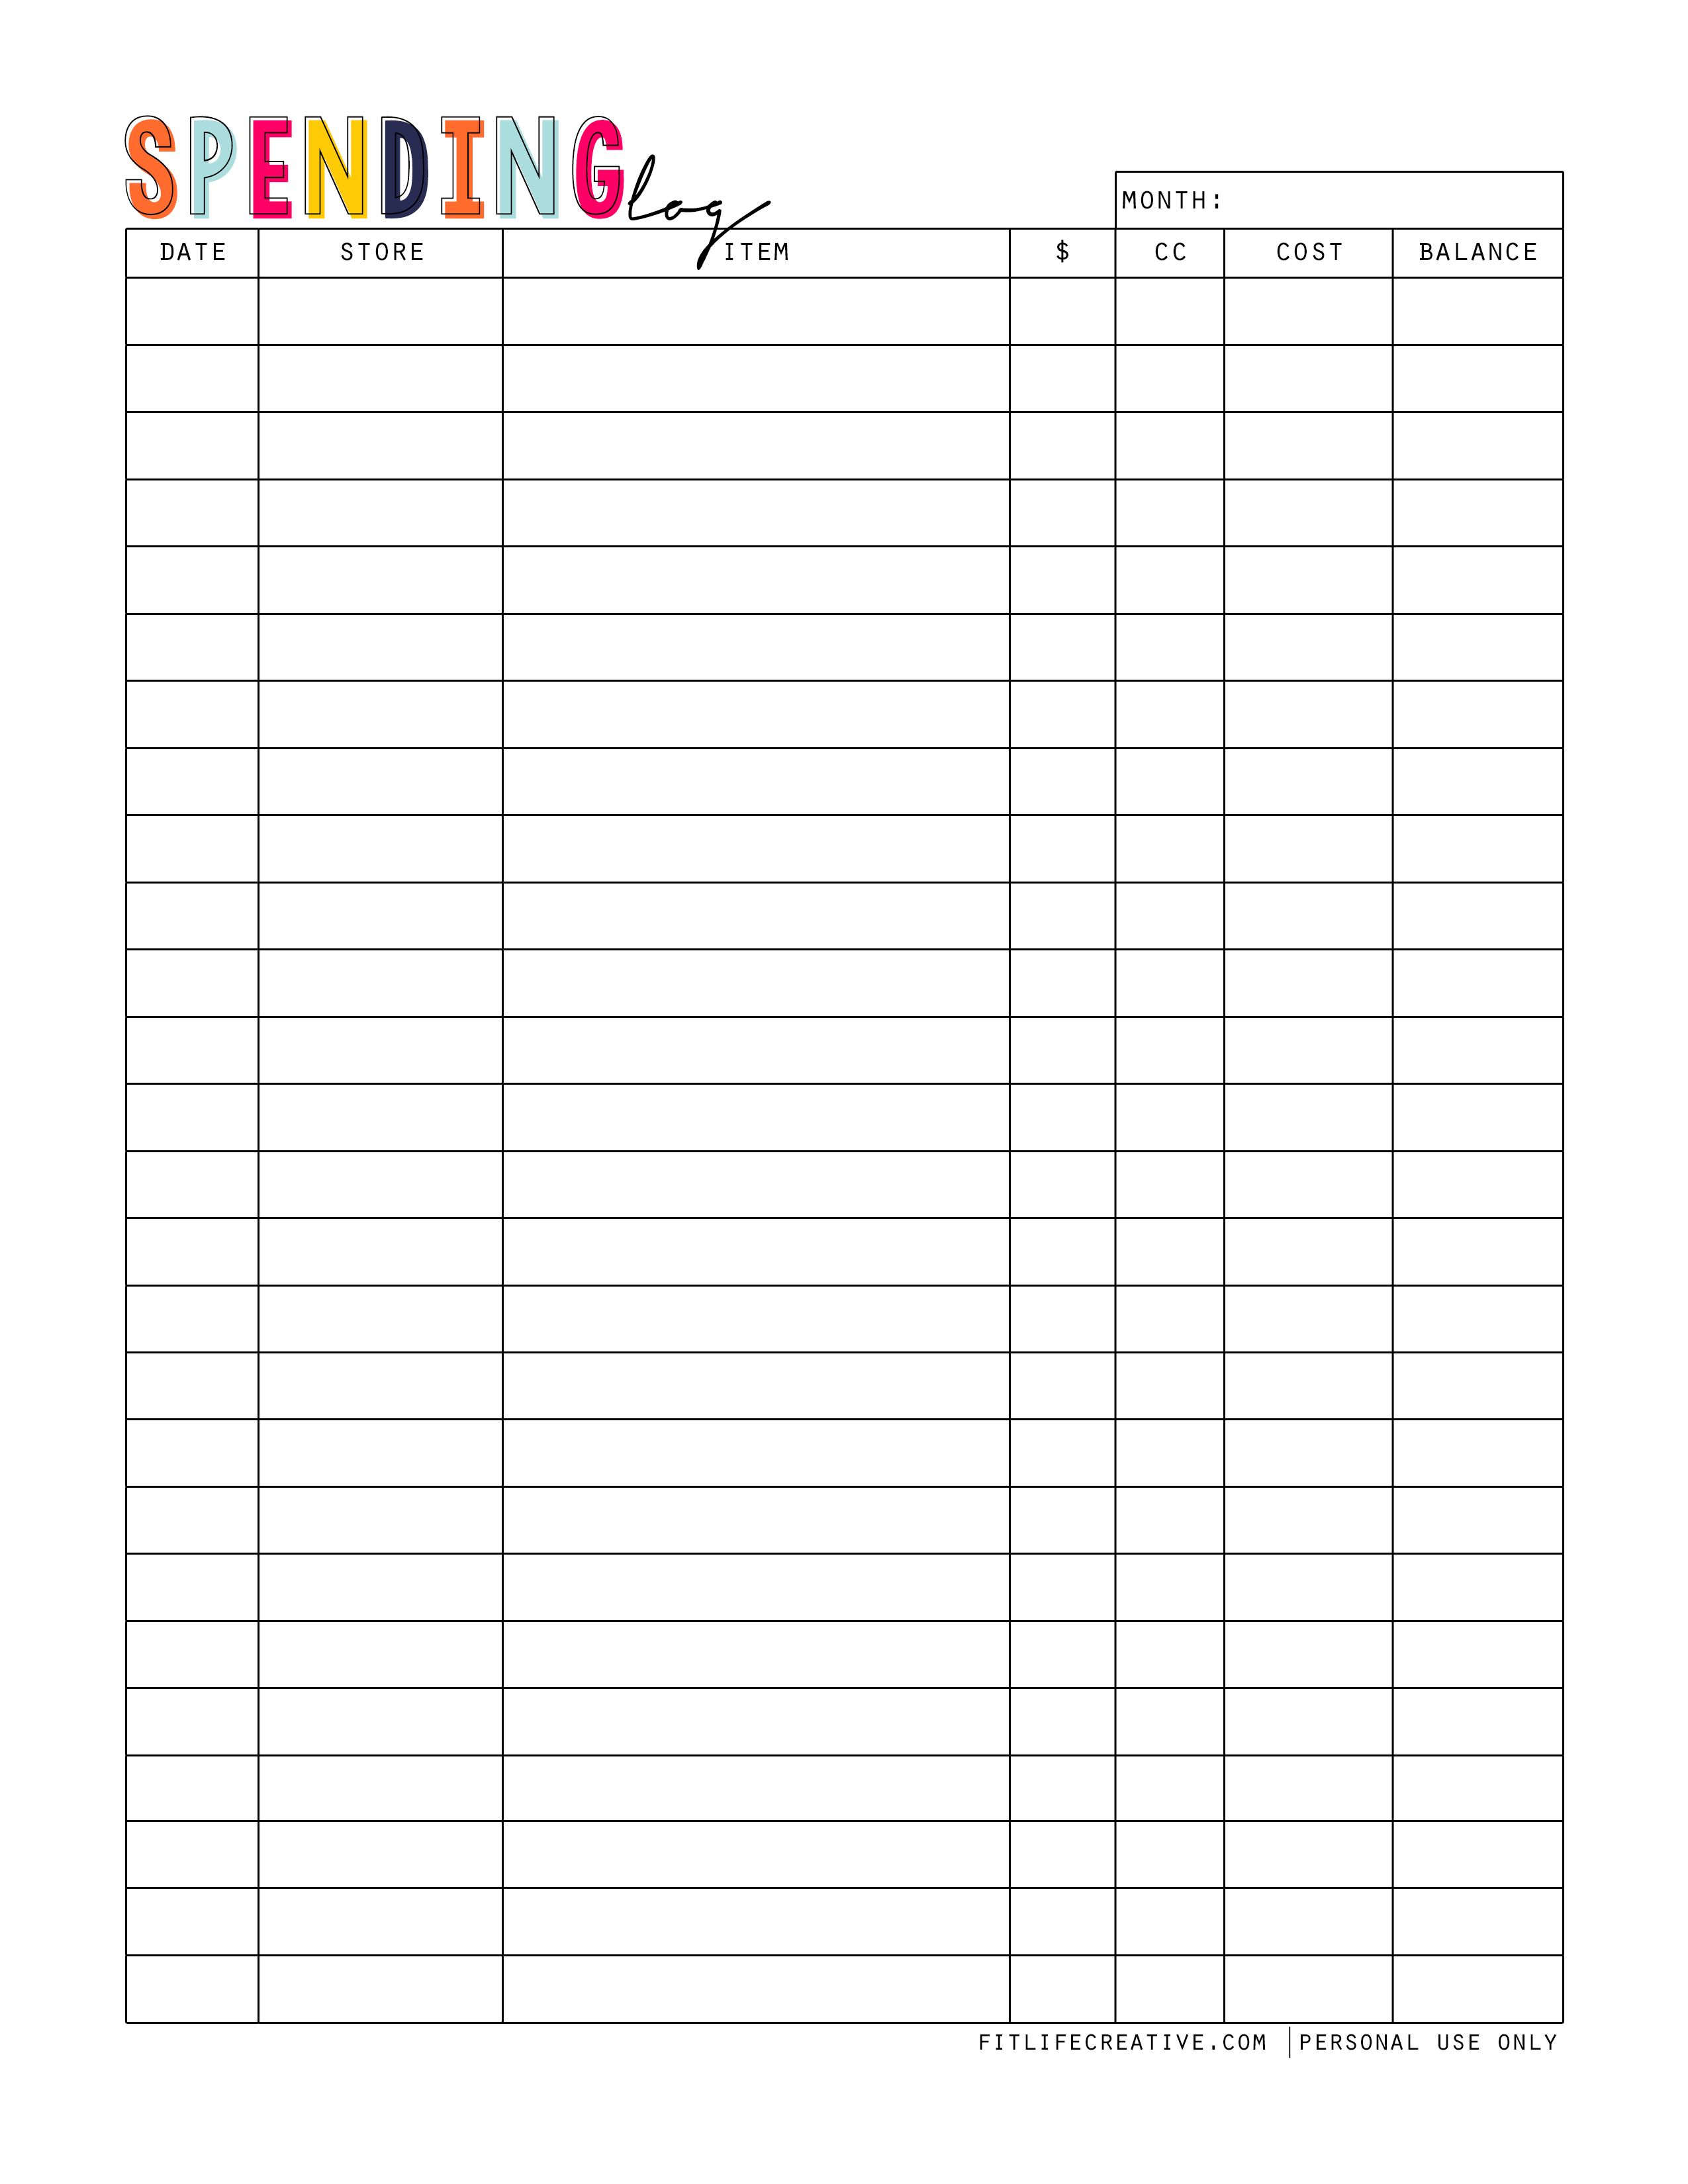 Spending Log printable free to download and use in your favorite 